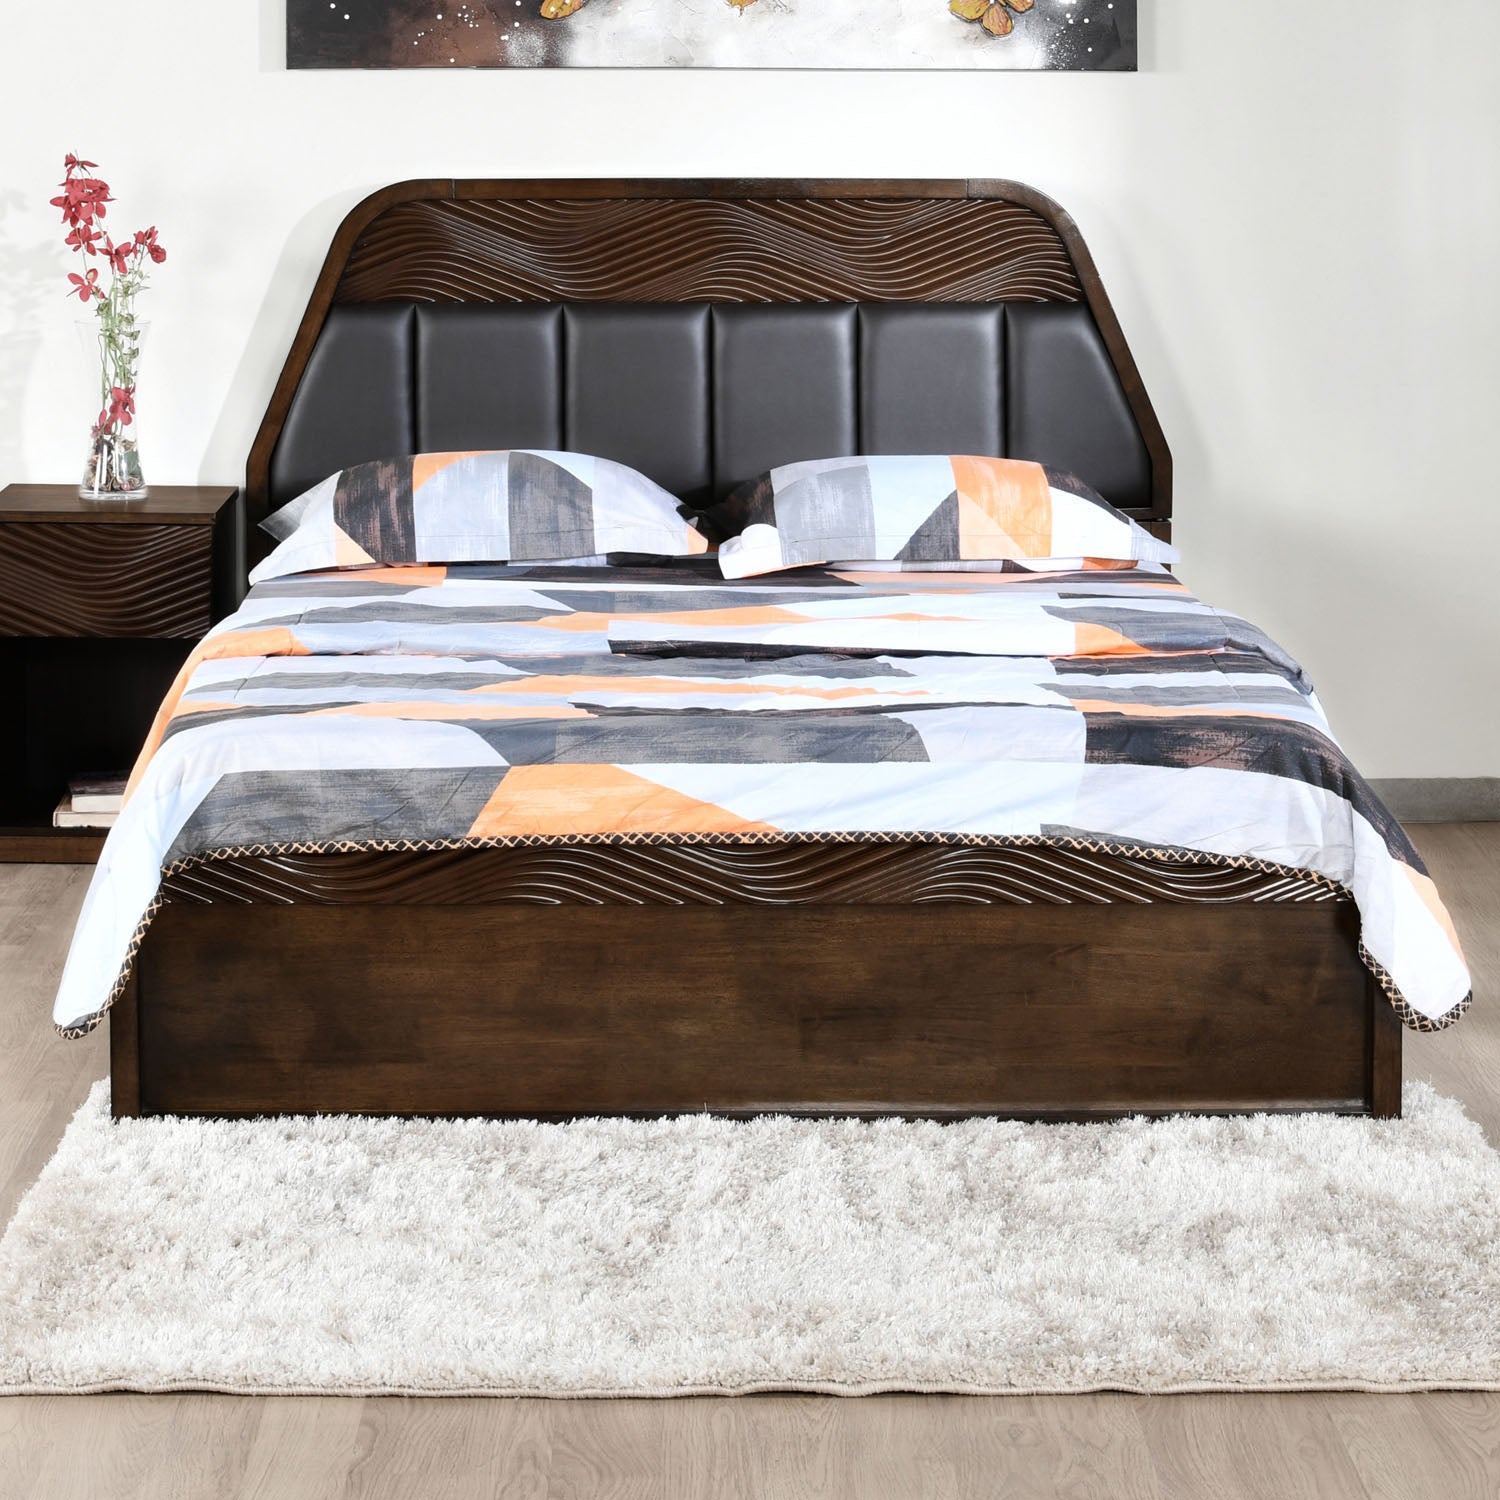 Jenna Queen Bed with Hydraulic Storage (Brown)